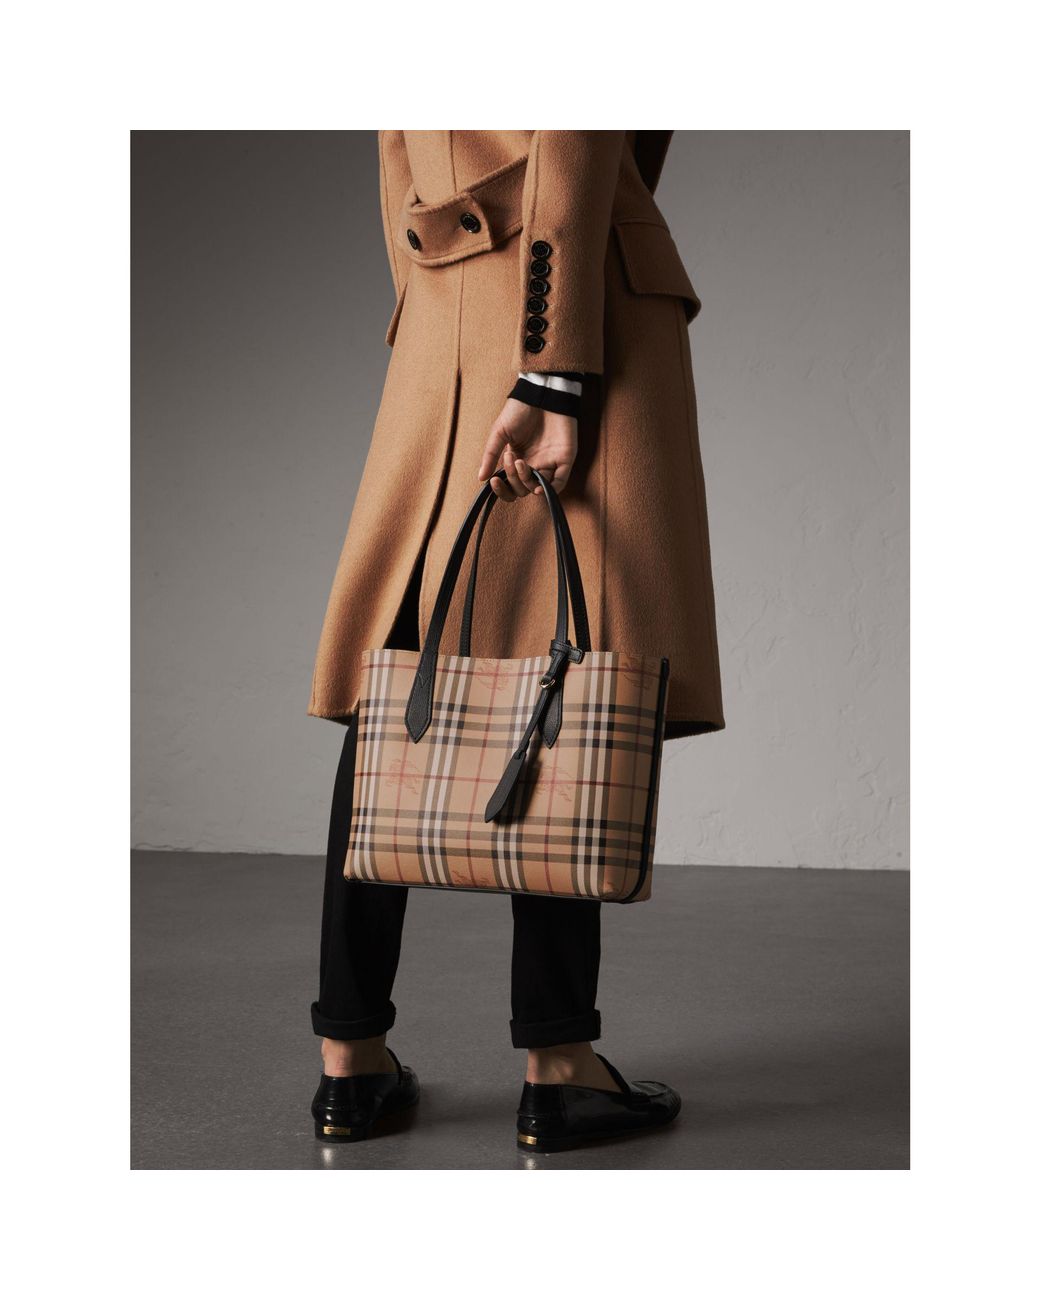 Burberry The Small Reversible Tote In Haymarket Check And Leather